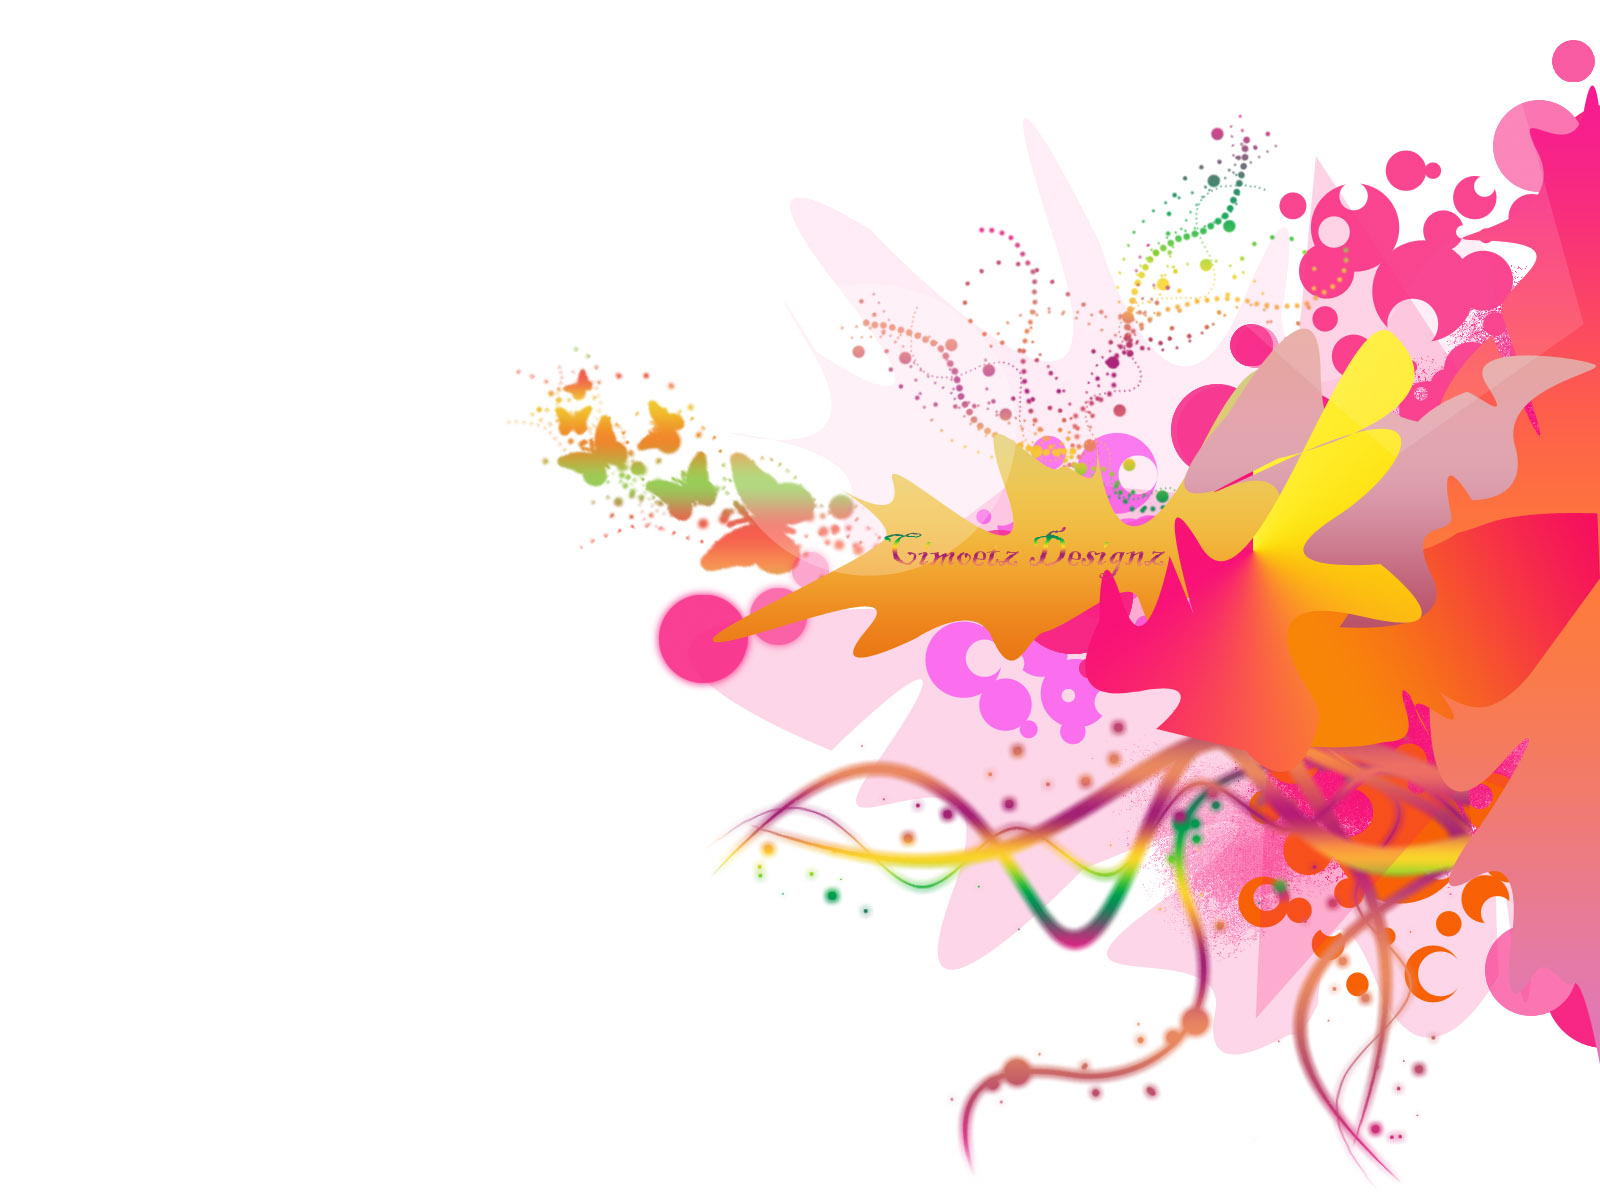 Sprinkle Bloomy Design Colorful Backgrounds - Powerpoint Colorful Background Design - HD Wallpaper 